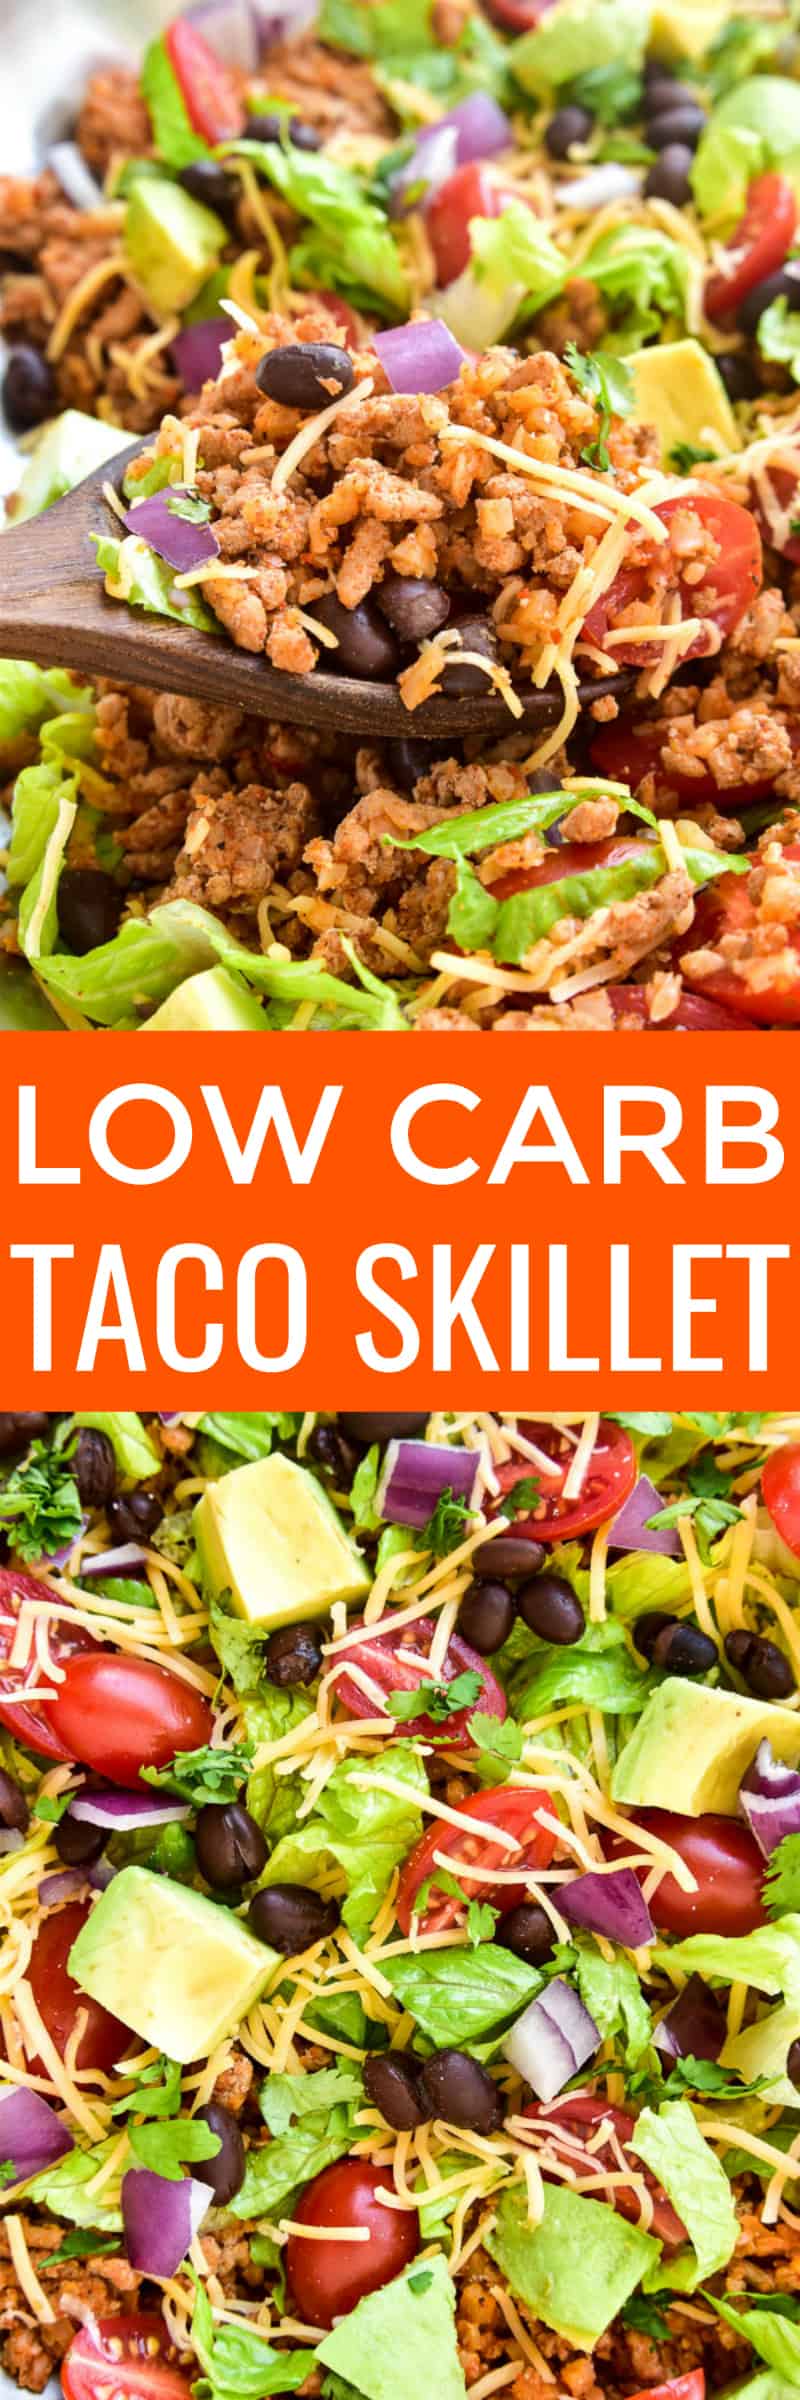 This Low Carb Taco Skillet is the ultimate healthy dinner recipe! Made with simple, fresh ingredients, this meal comes together quickly and is a delicious alternative to traditional tacos.